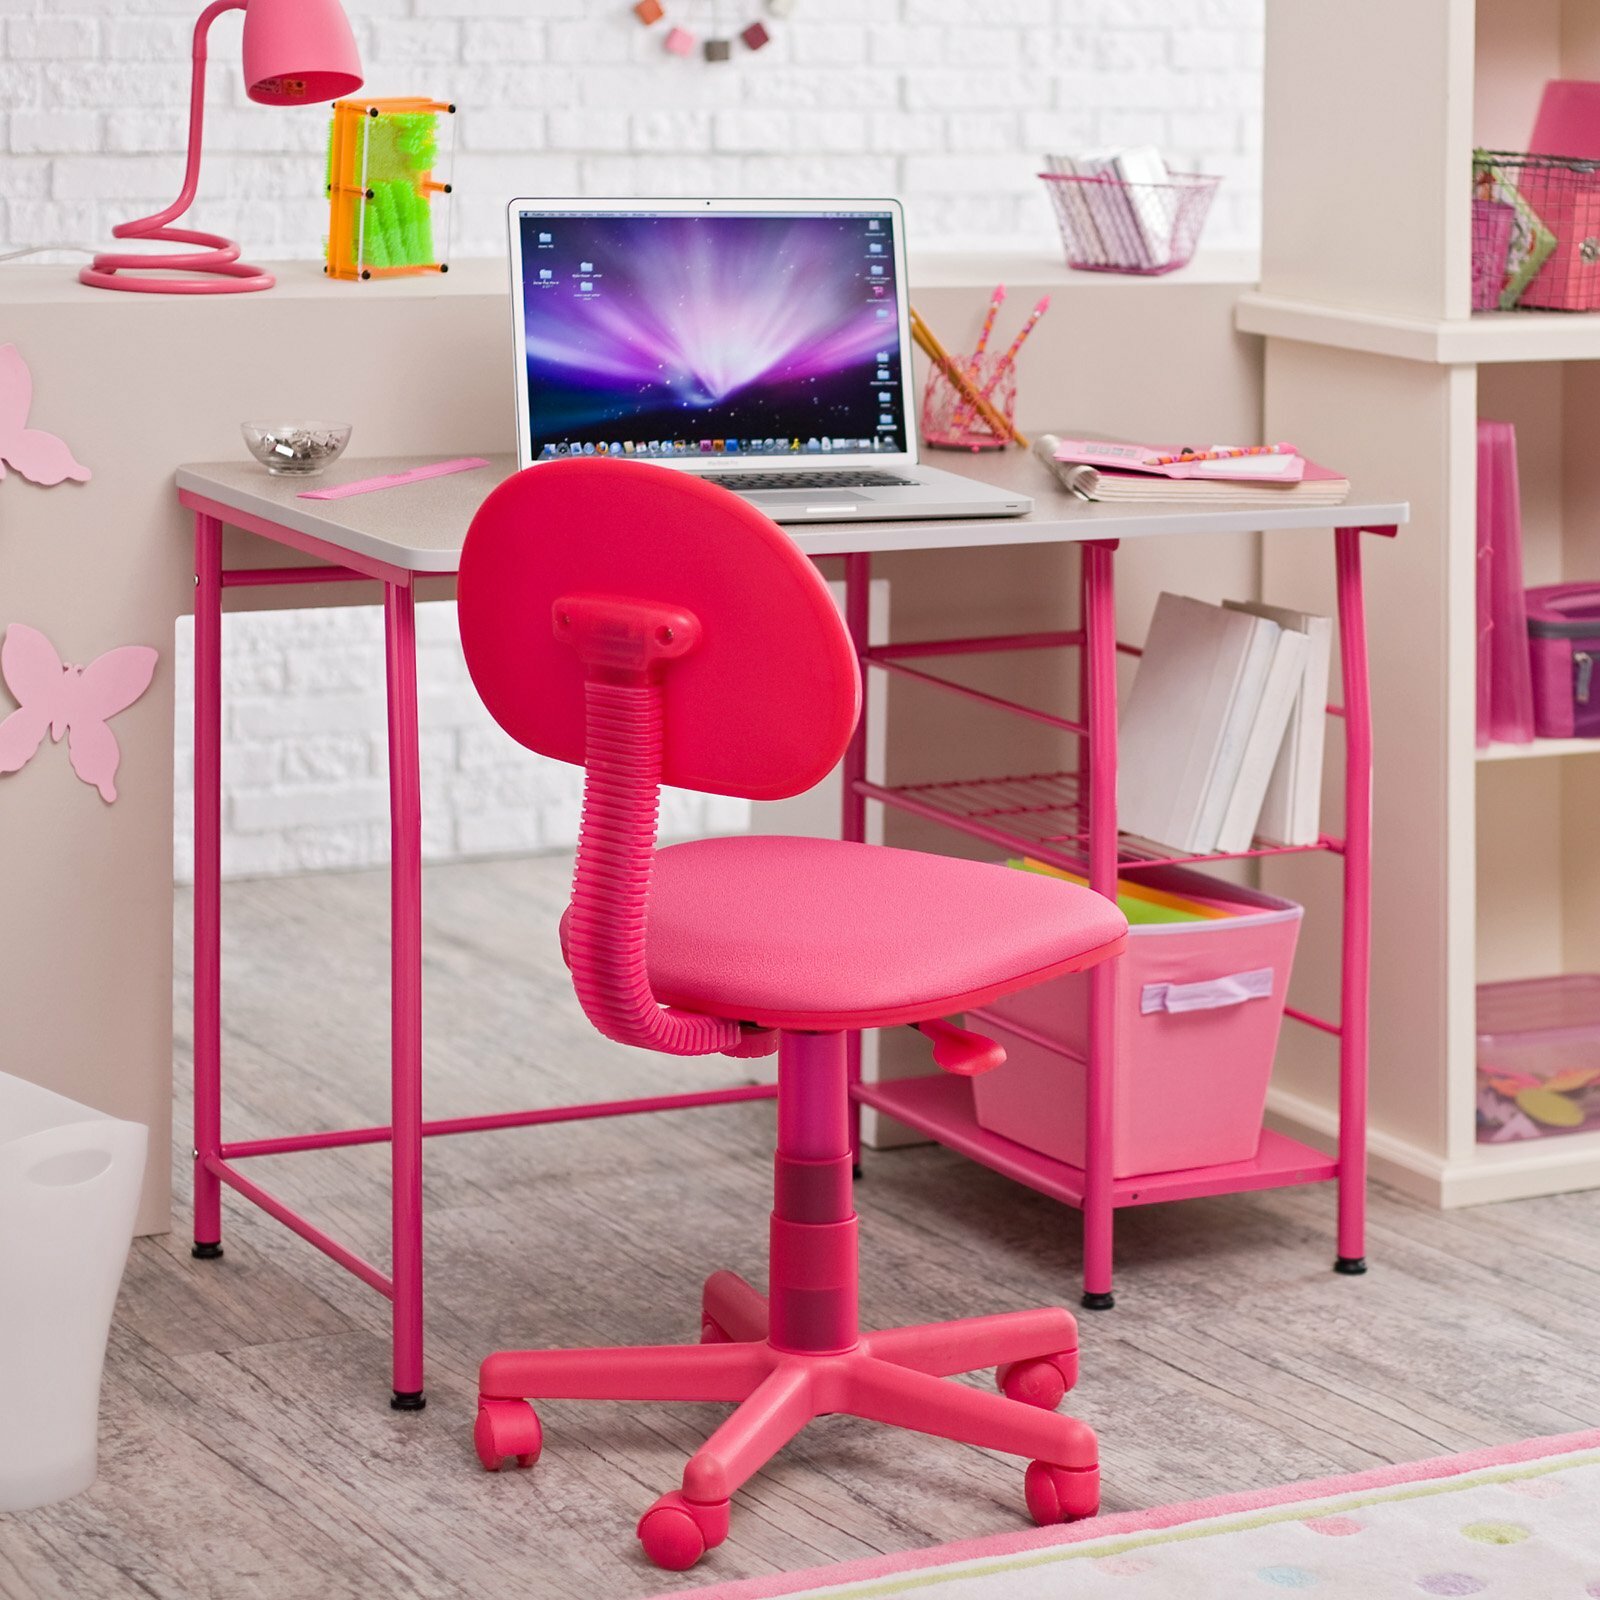 childs desk and chair set pink